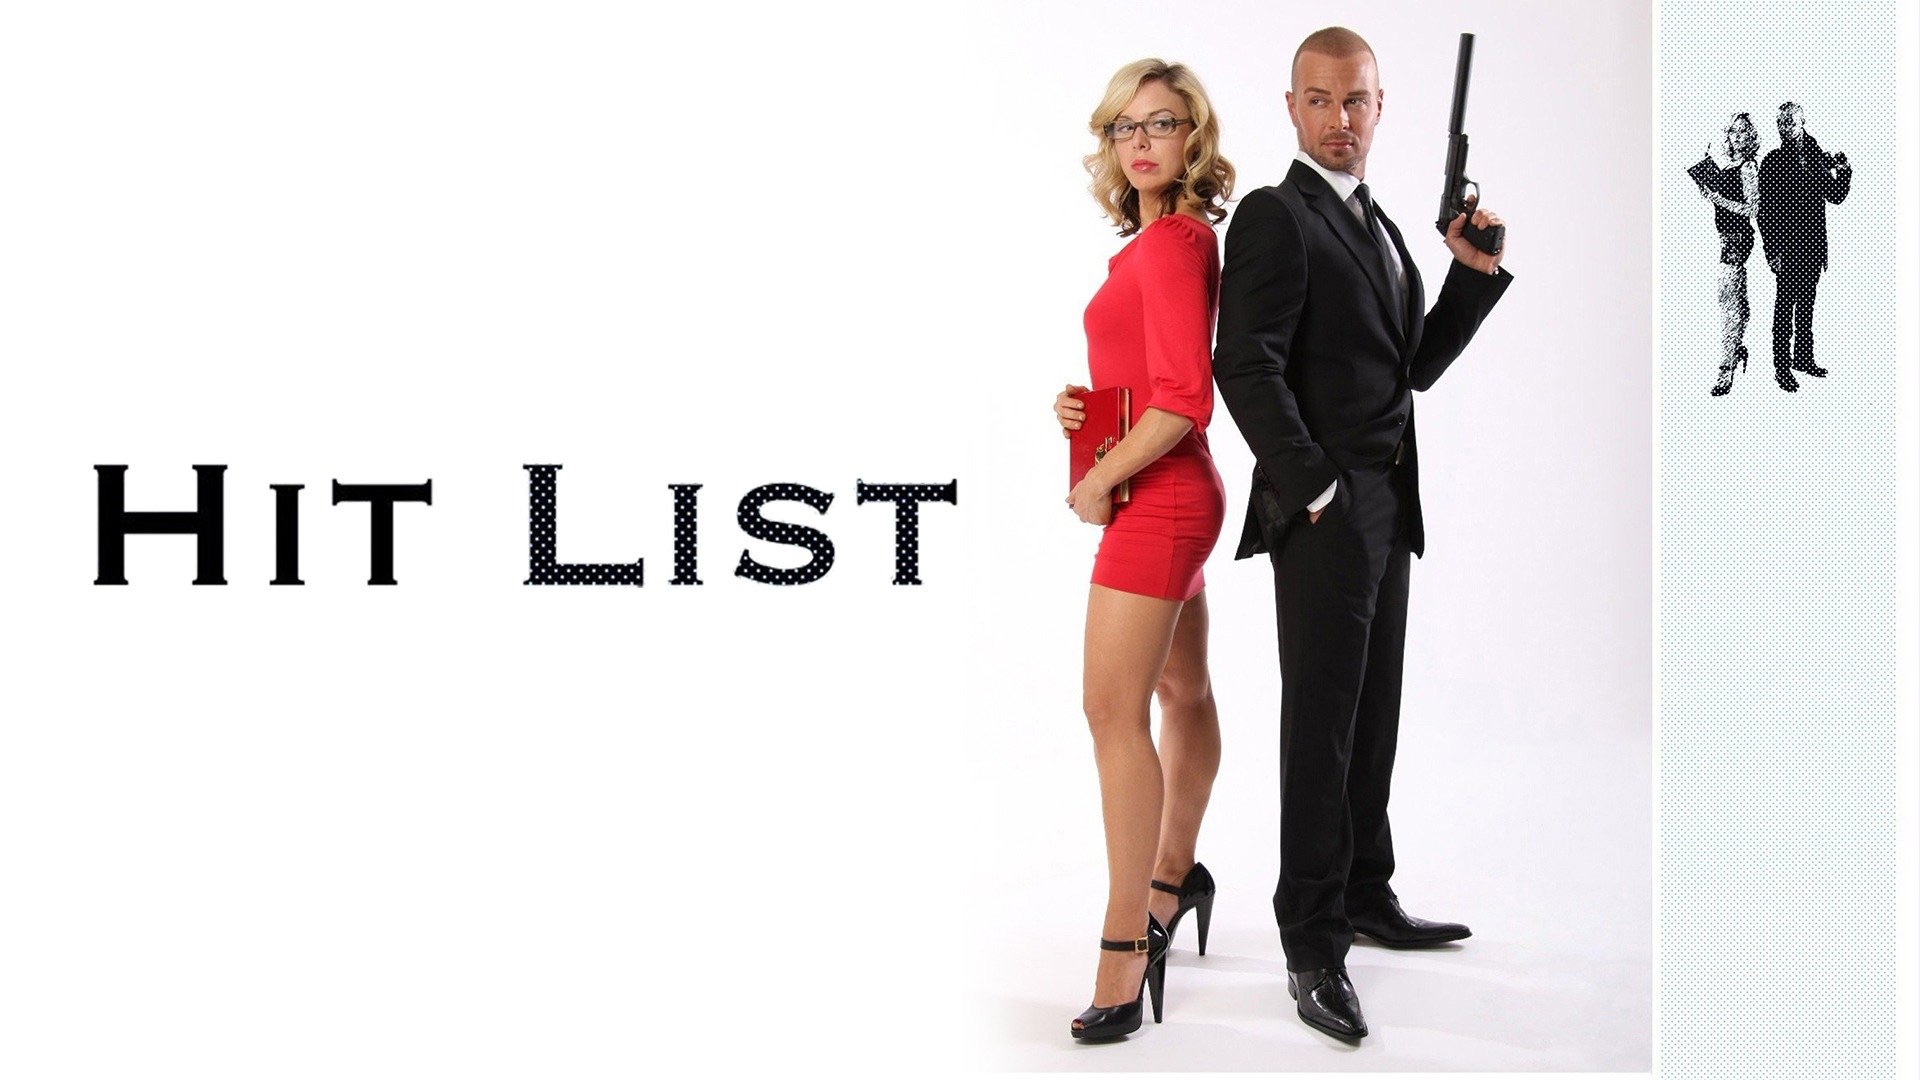 the hit list movie dailymotion